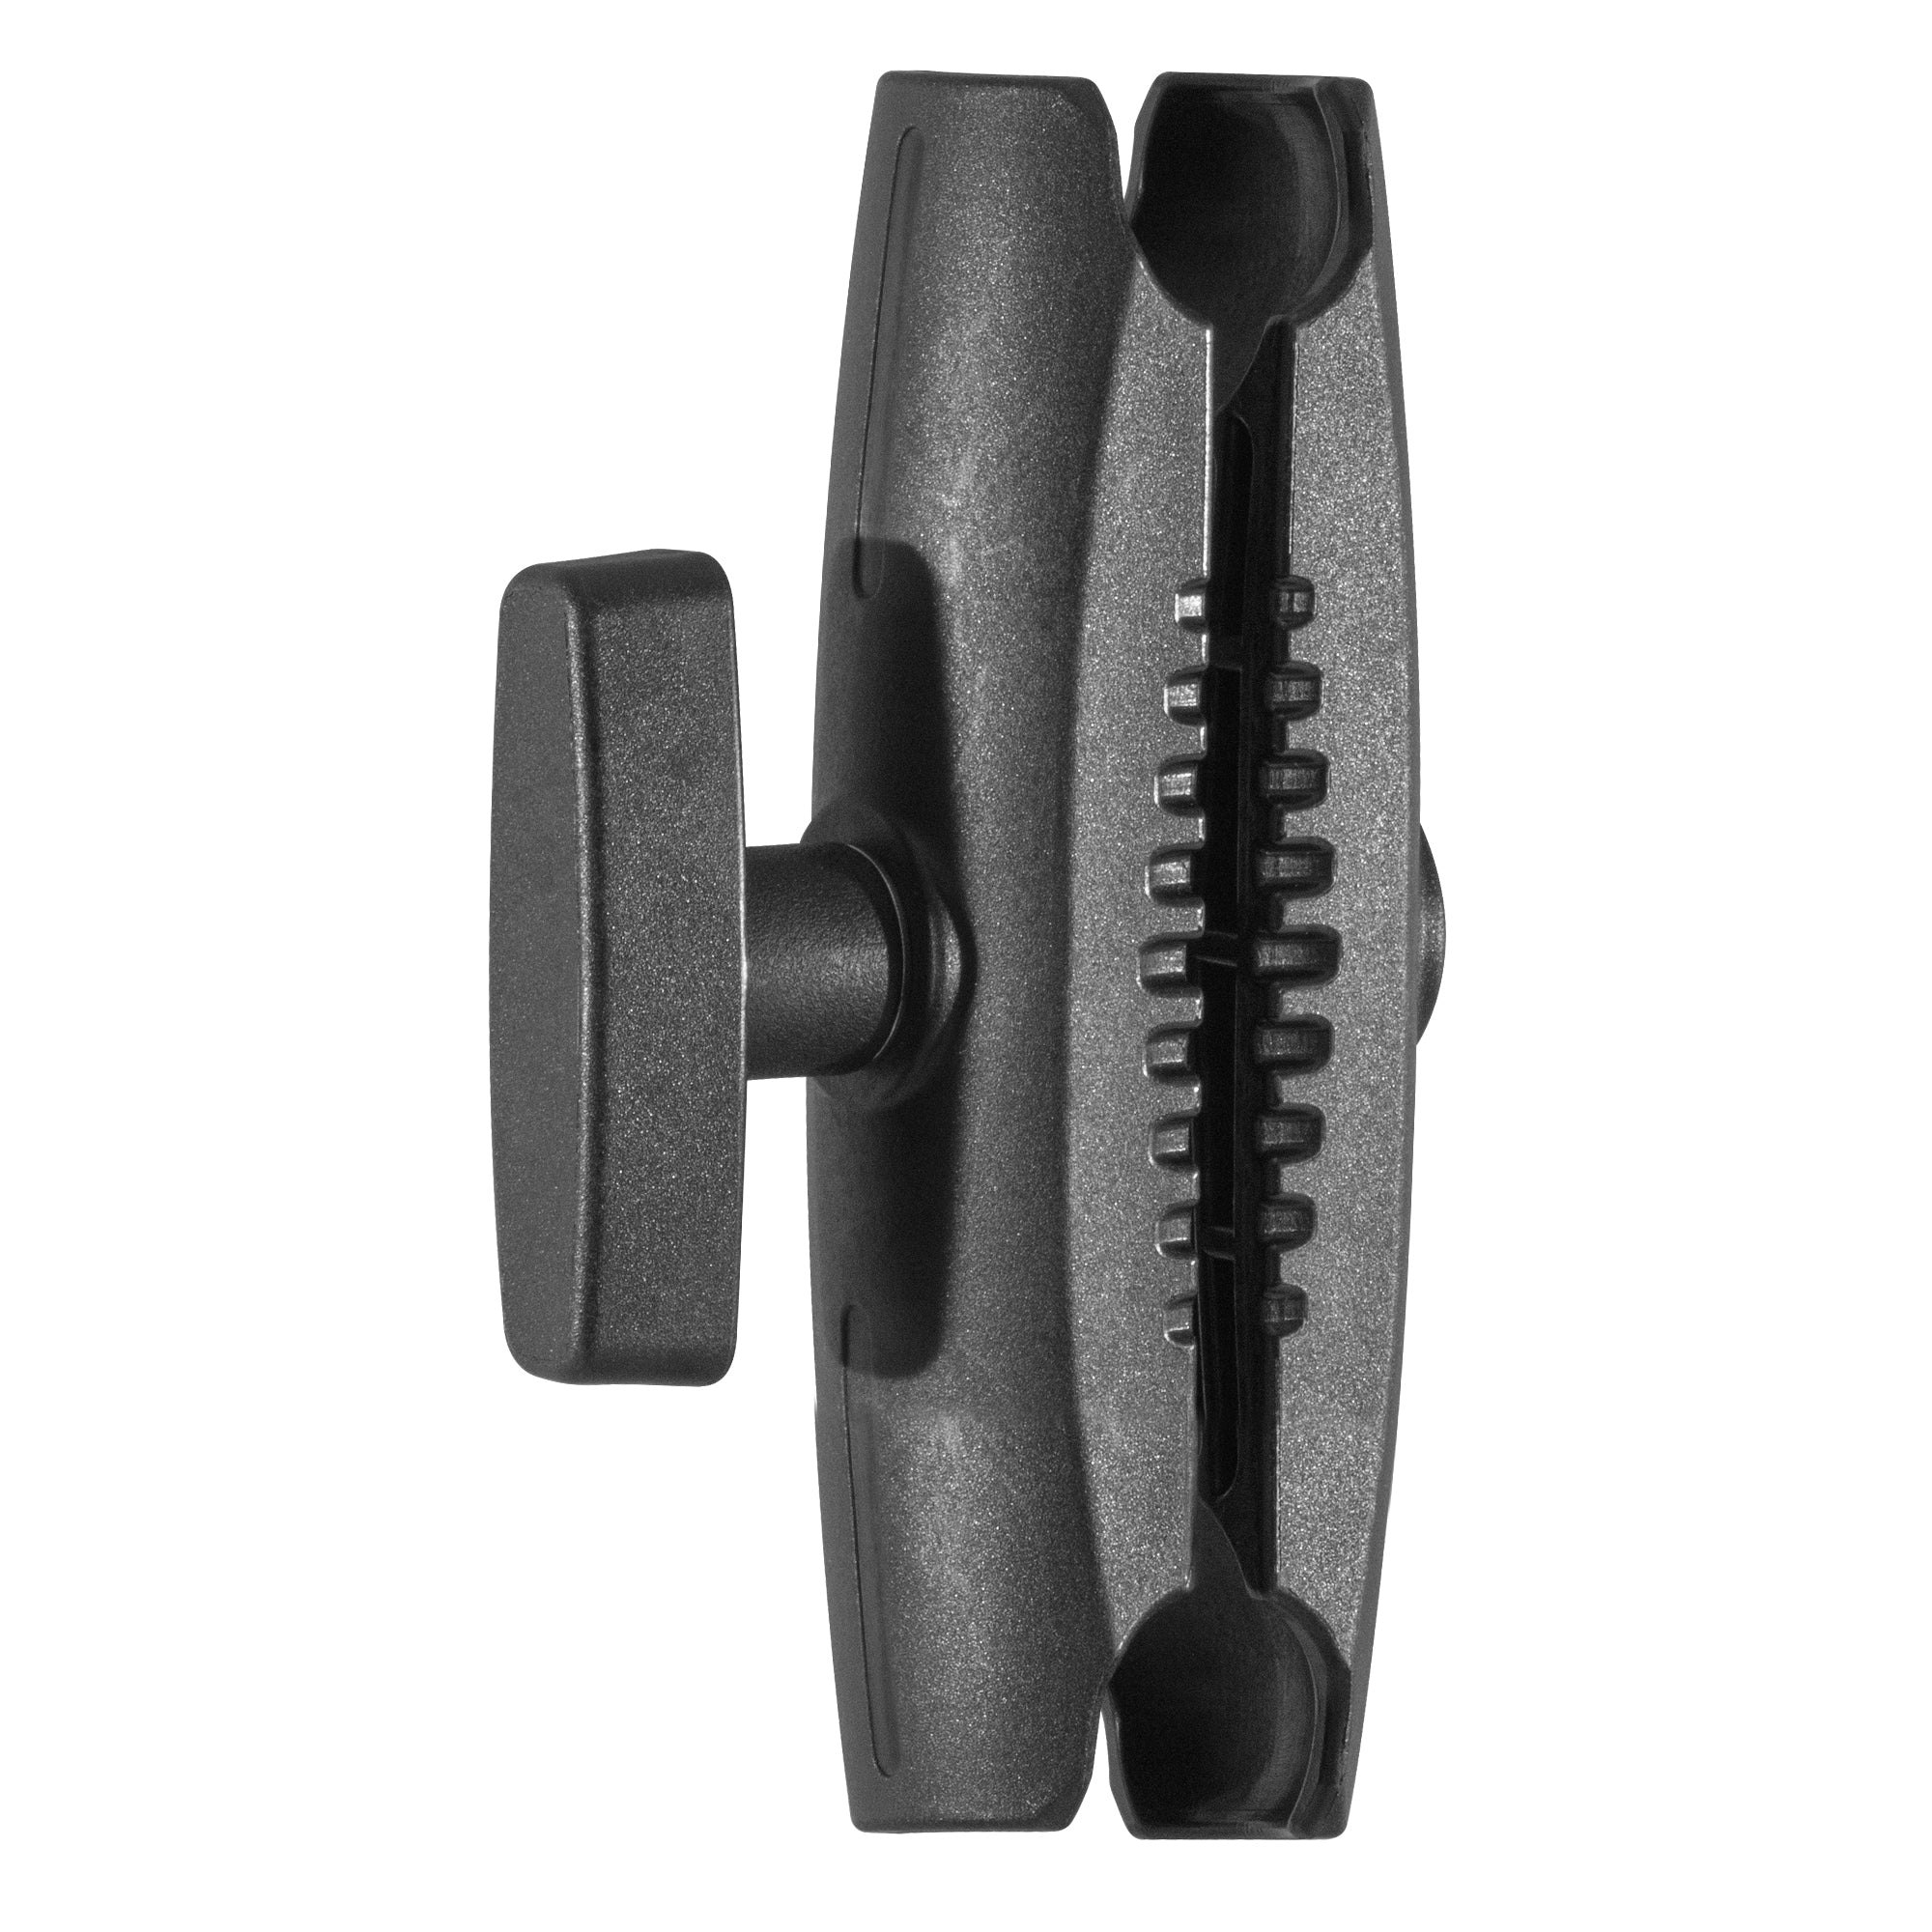 iBOLT™ Mounts- 6 inch Composite Arm for 38 mm / 1.5 inch Ball Joint